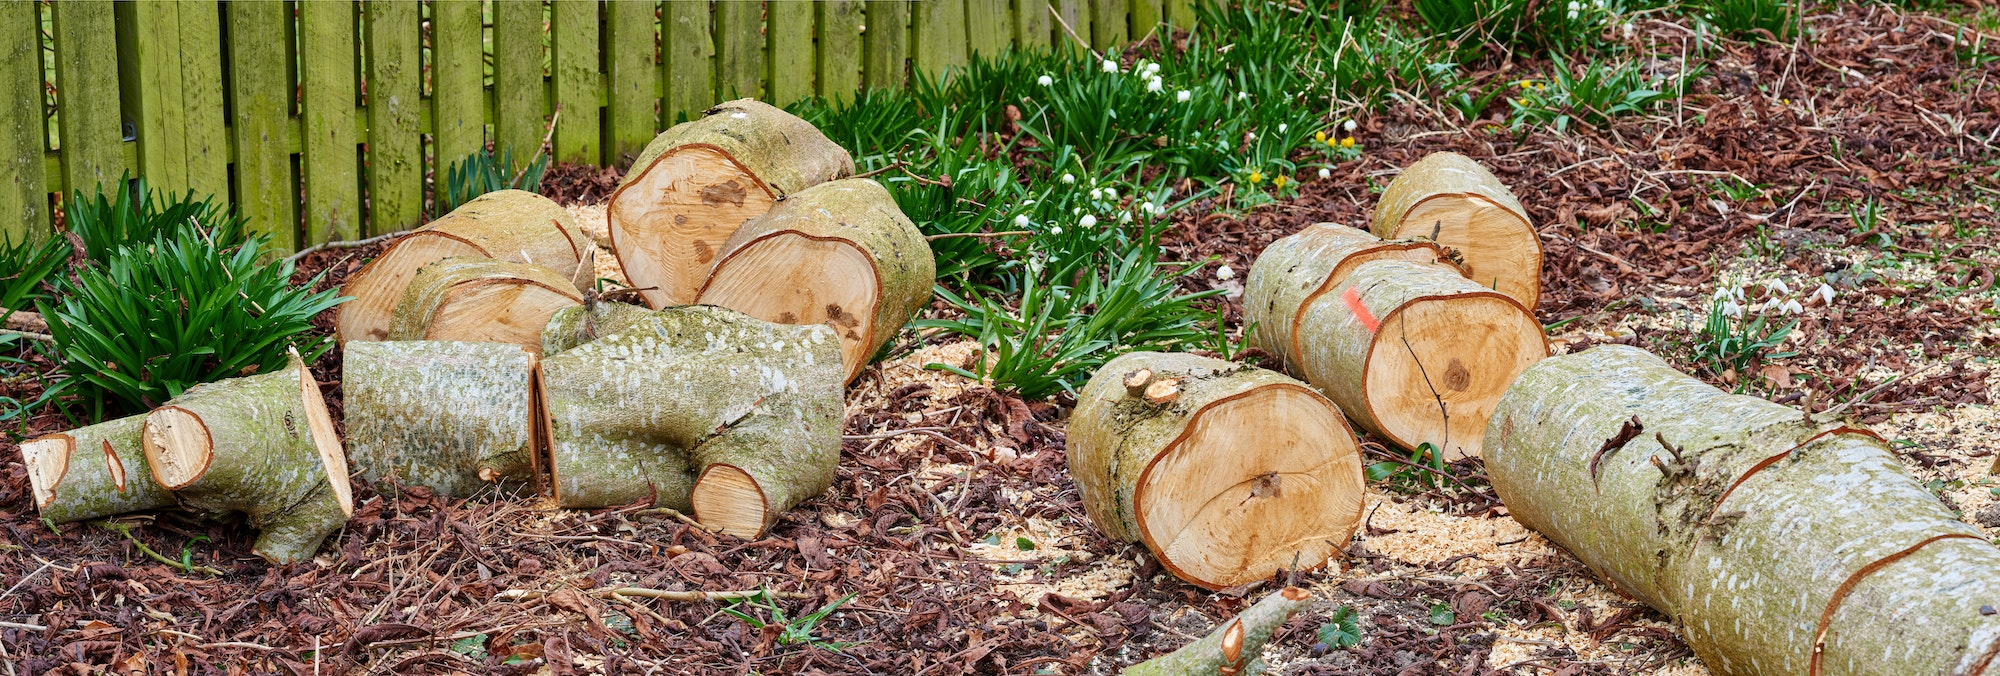 Firewood of chestnut tree. Chestnut tree - very fine firewood. Clearing up the garden.